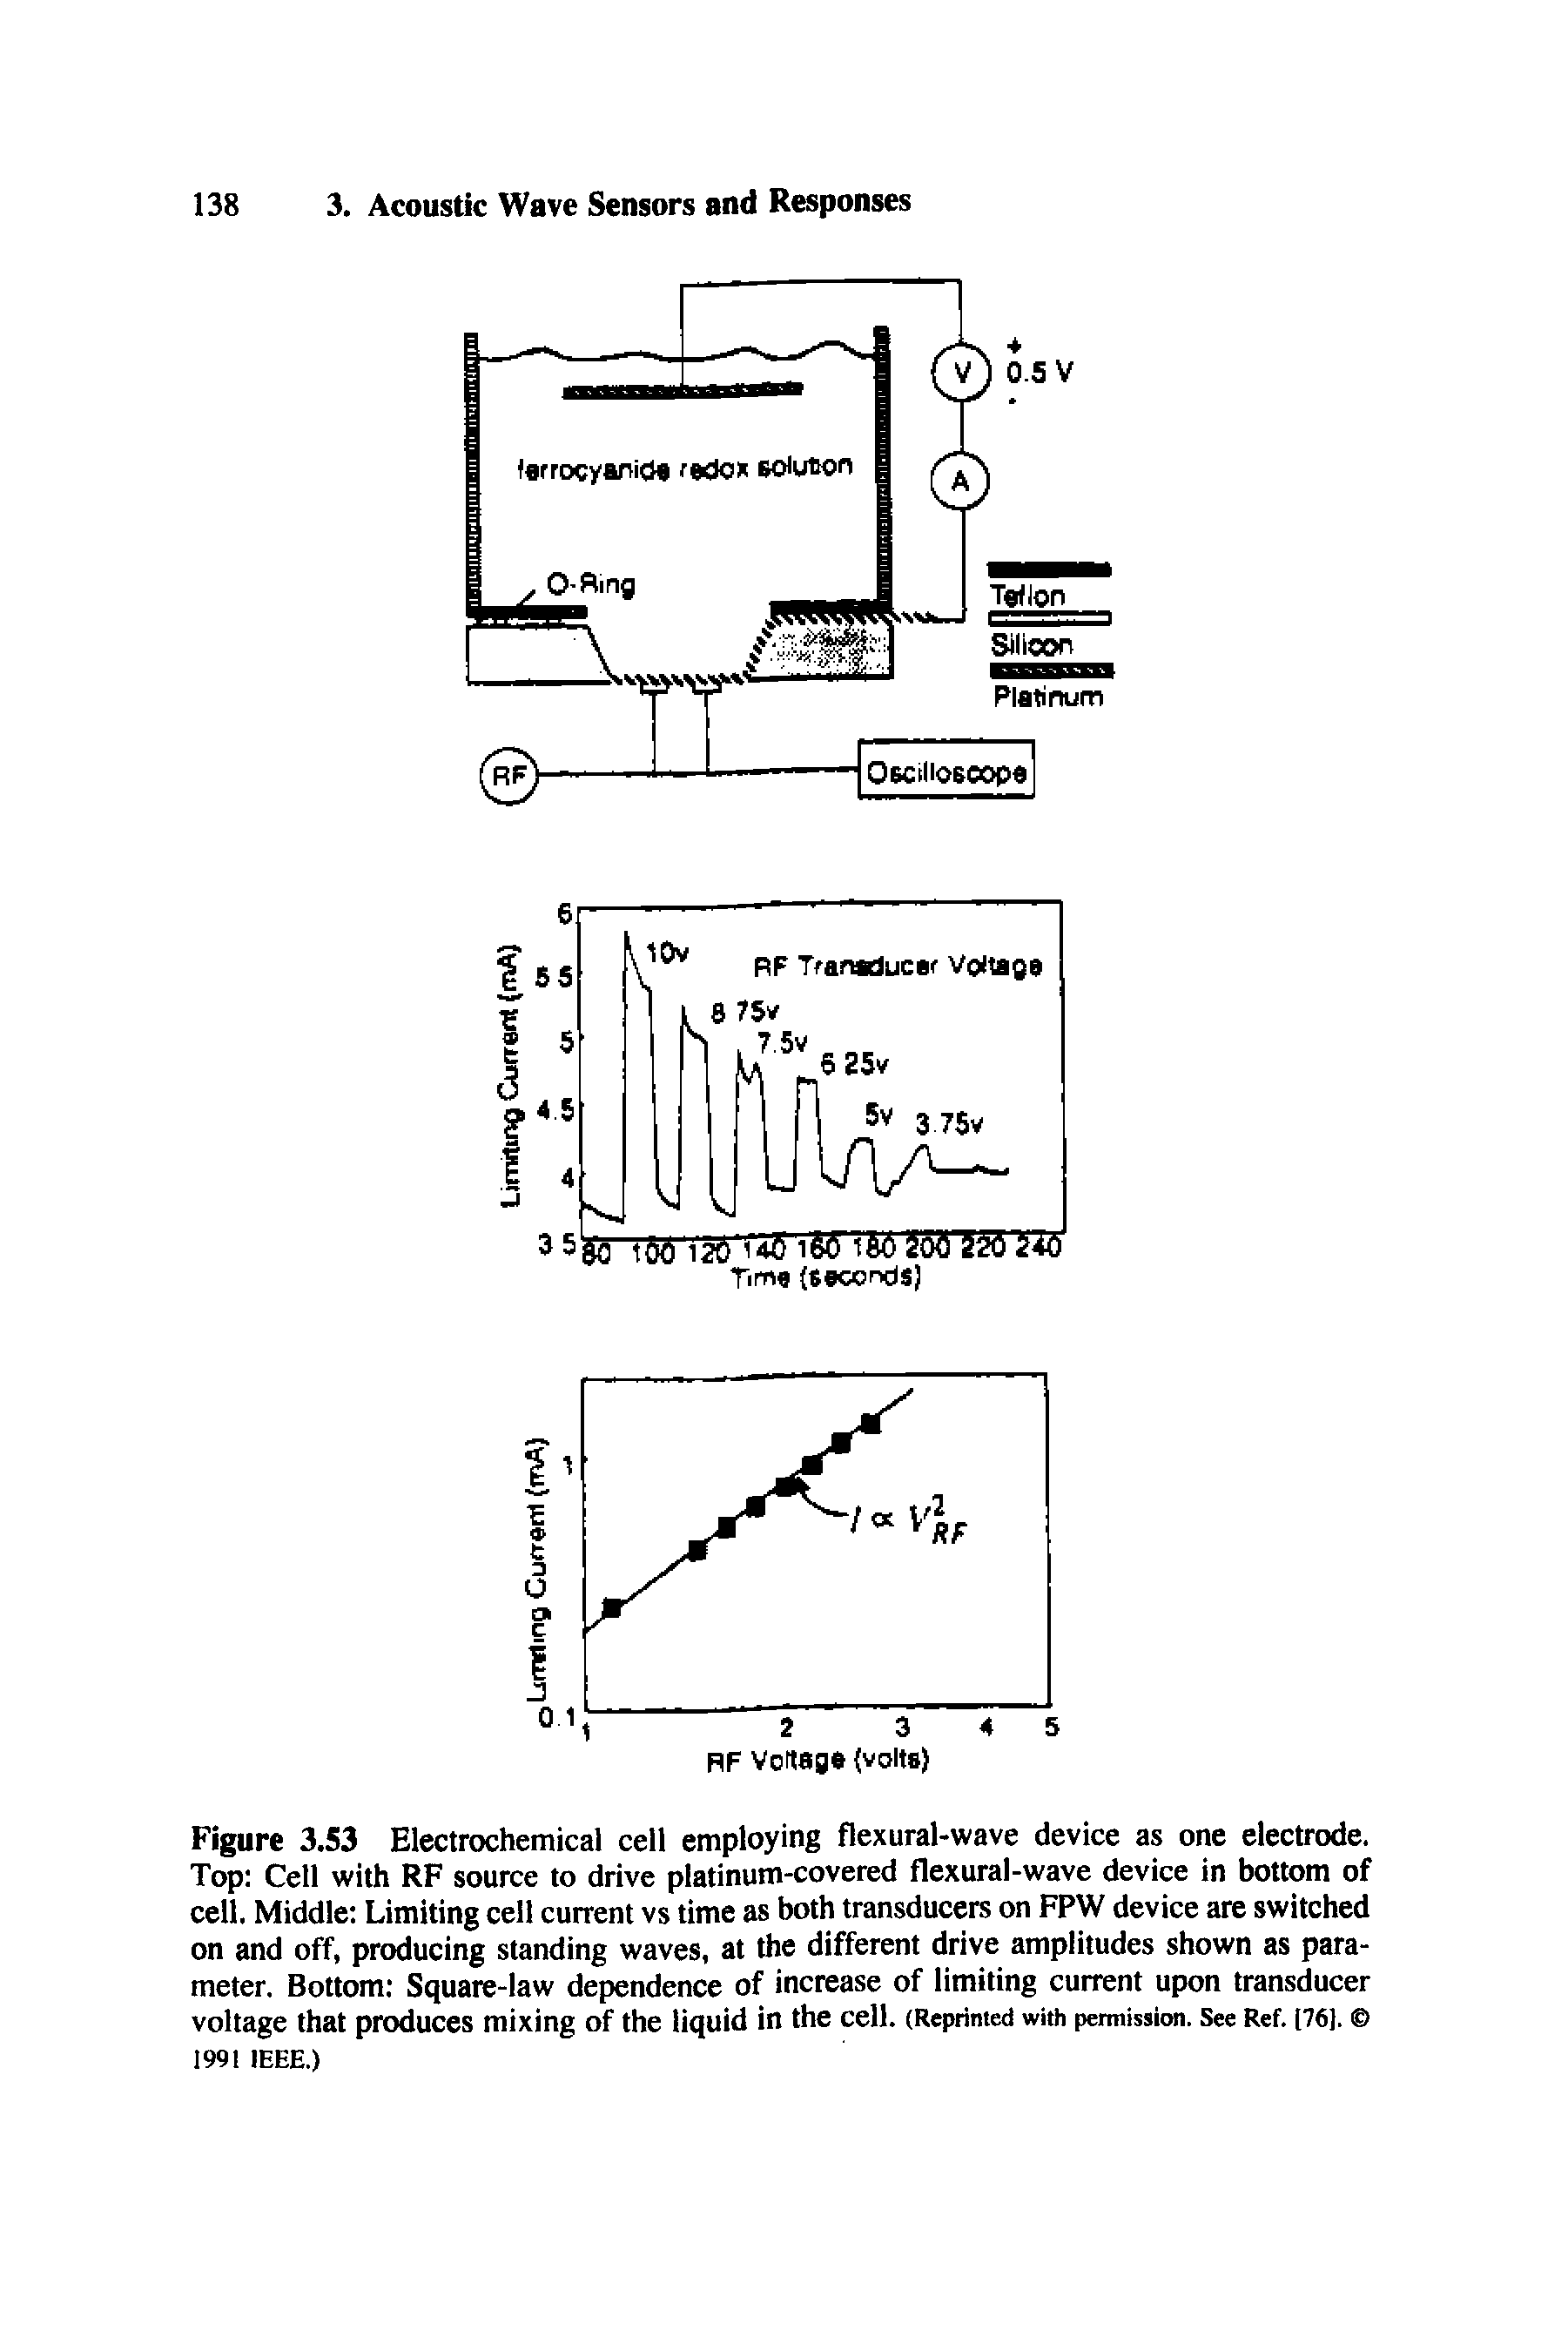 Figure 3.53 Electrochemical cell employing flexural-wave device as one electrode. Top Cell with RF source to drive platinum-covered flexural-wave device in bottom of cell. Middle Limiting celt current vs time as both transducers on FPW device are switched on and off, producing standing waves, at the different drive amplitudes shown as parameter. Bottom Square-law dependence of increase of limiting current upon transducer voltage that produces mixing of the liquid in the cell. (Reprinted with permission, see Ref. (76). 1991 IEEE.)...